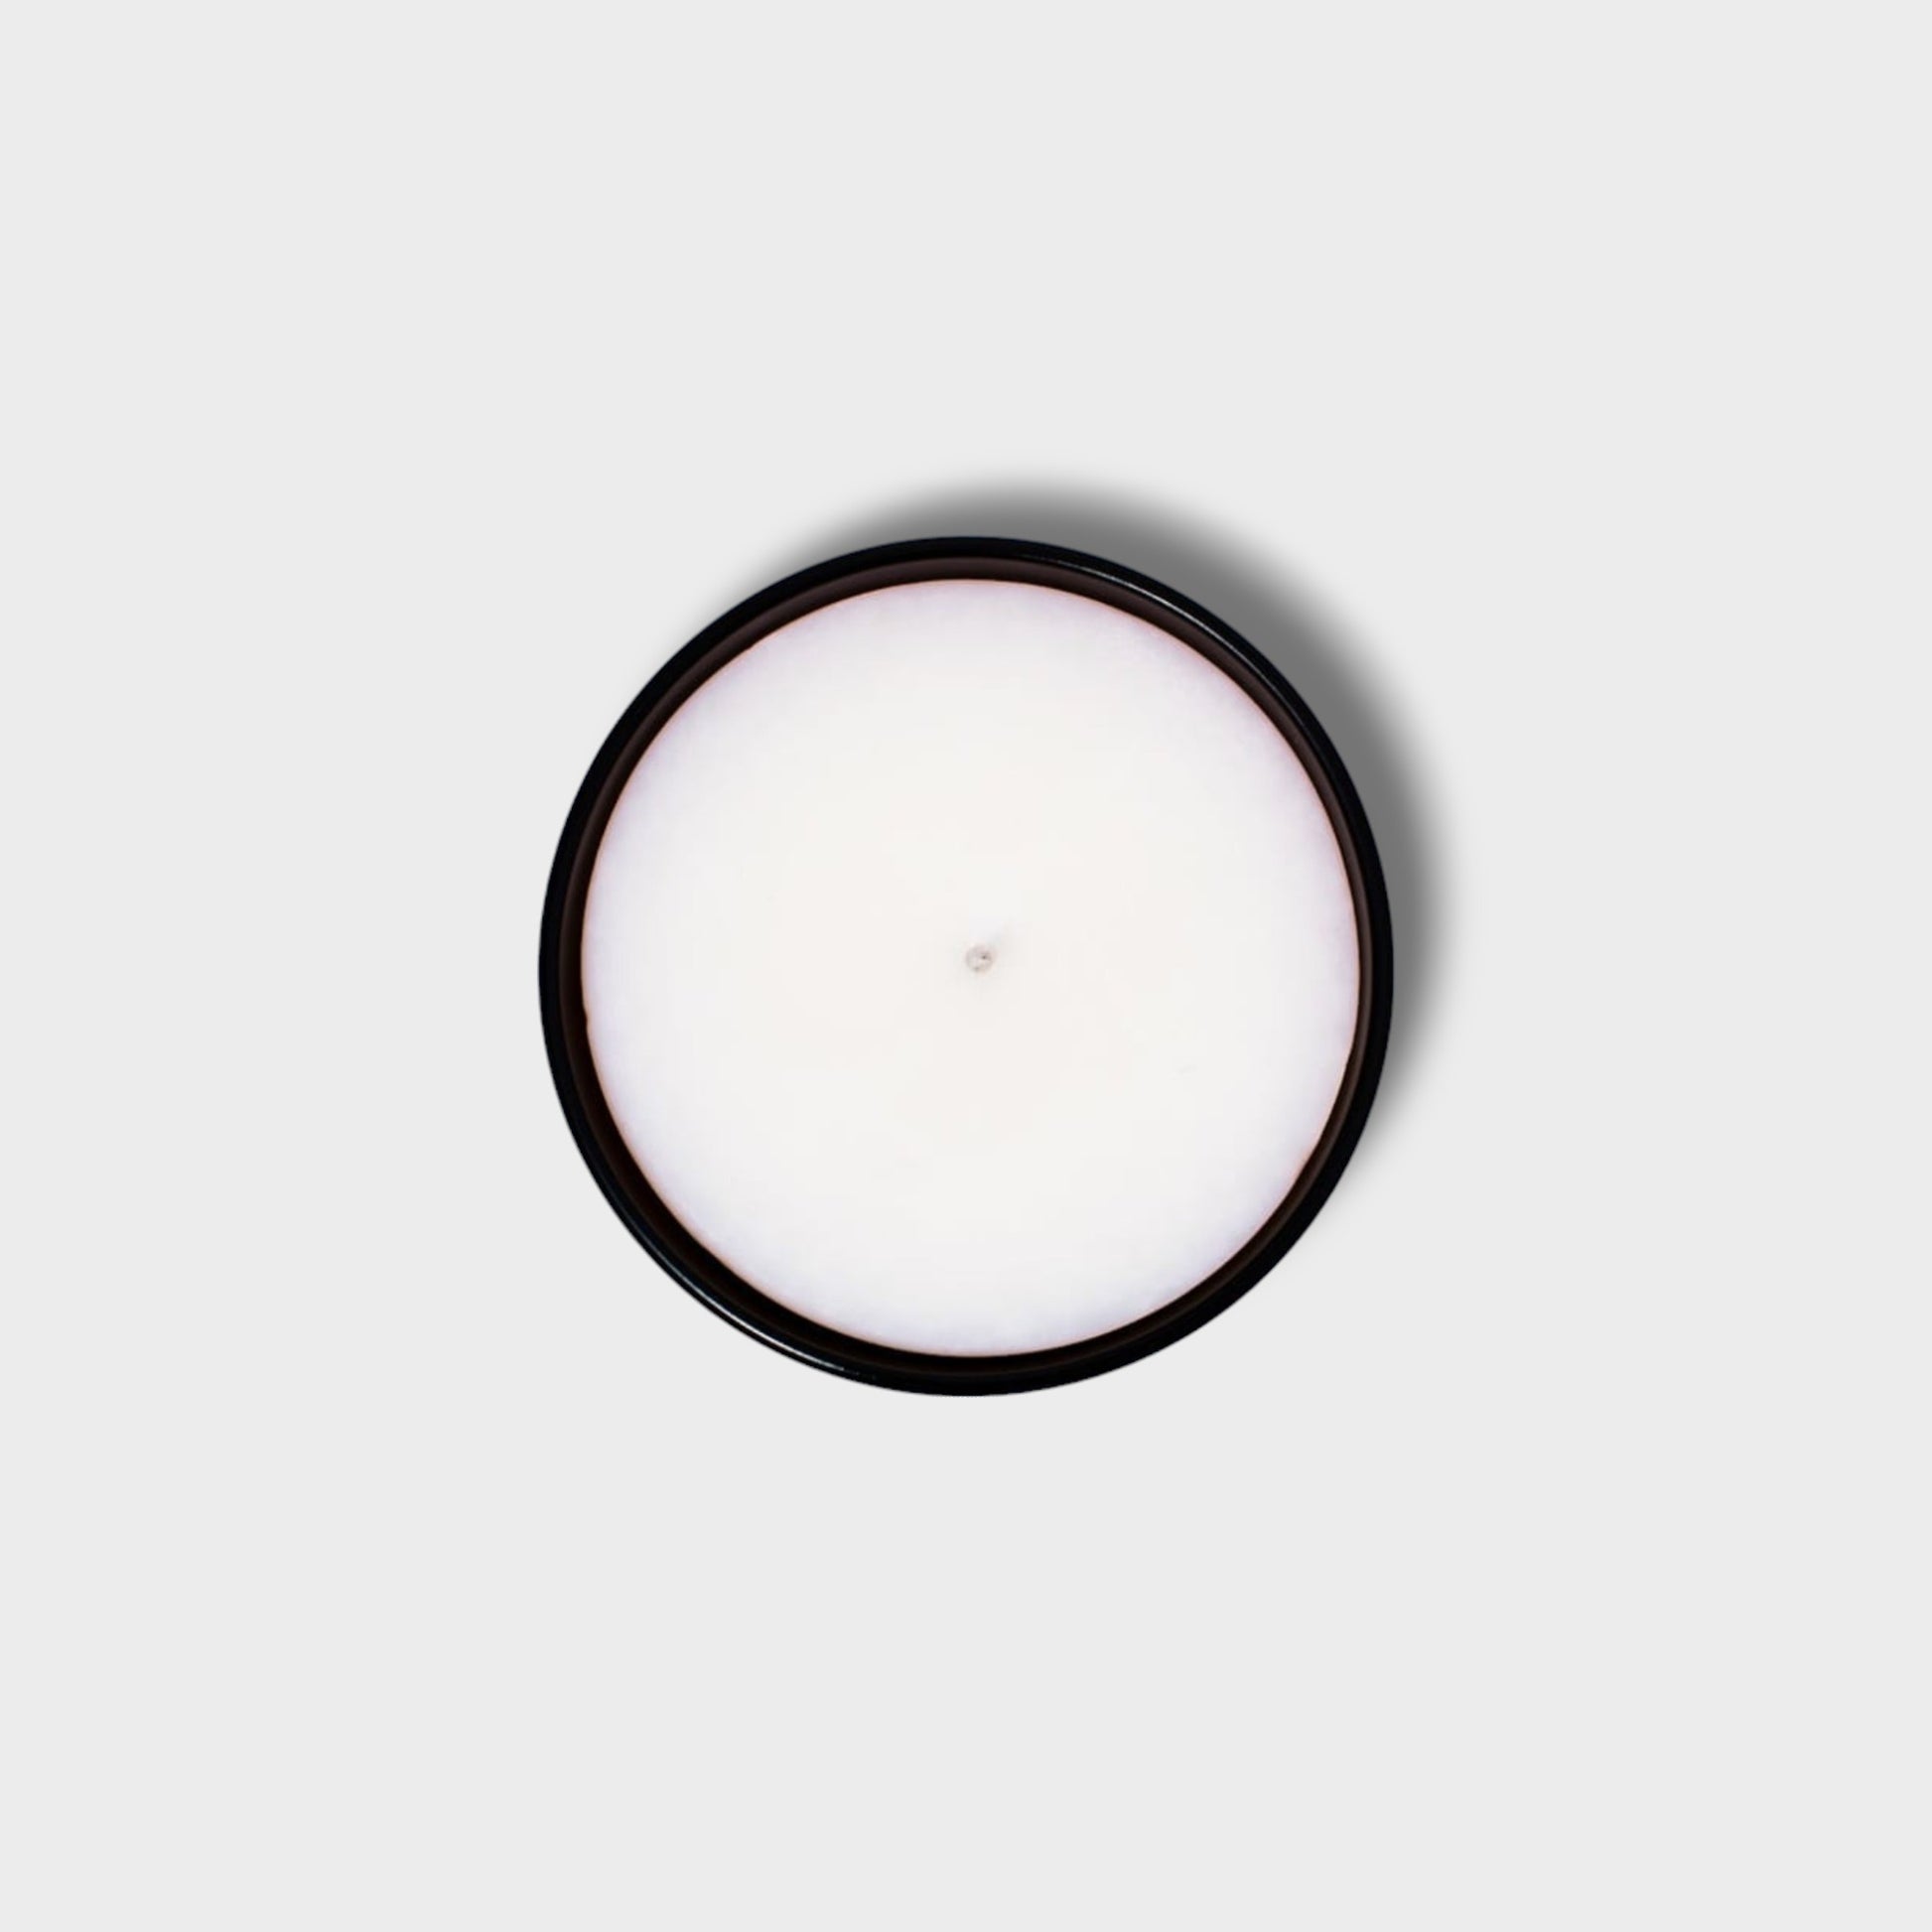 300 G SENZIA SCENTED CANDLE